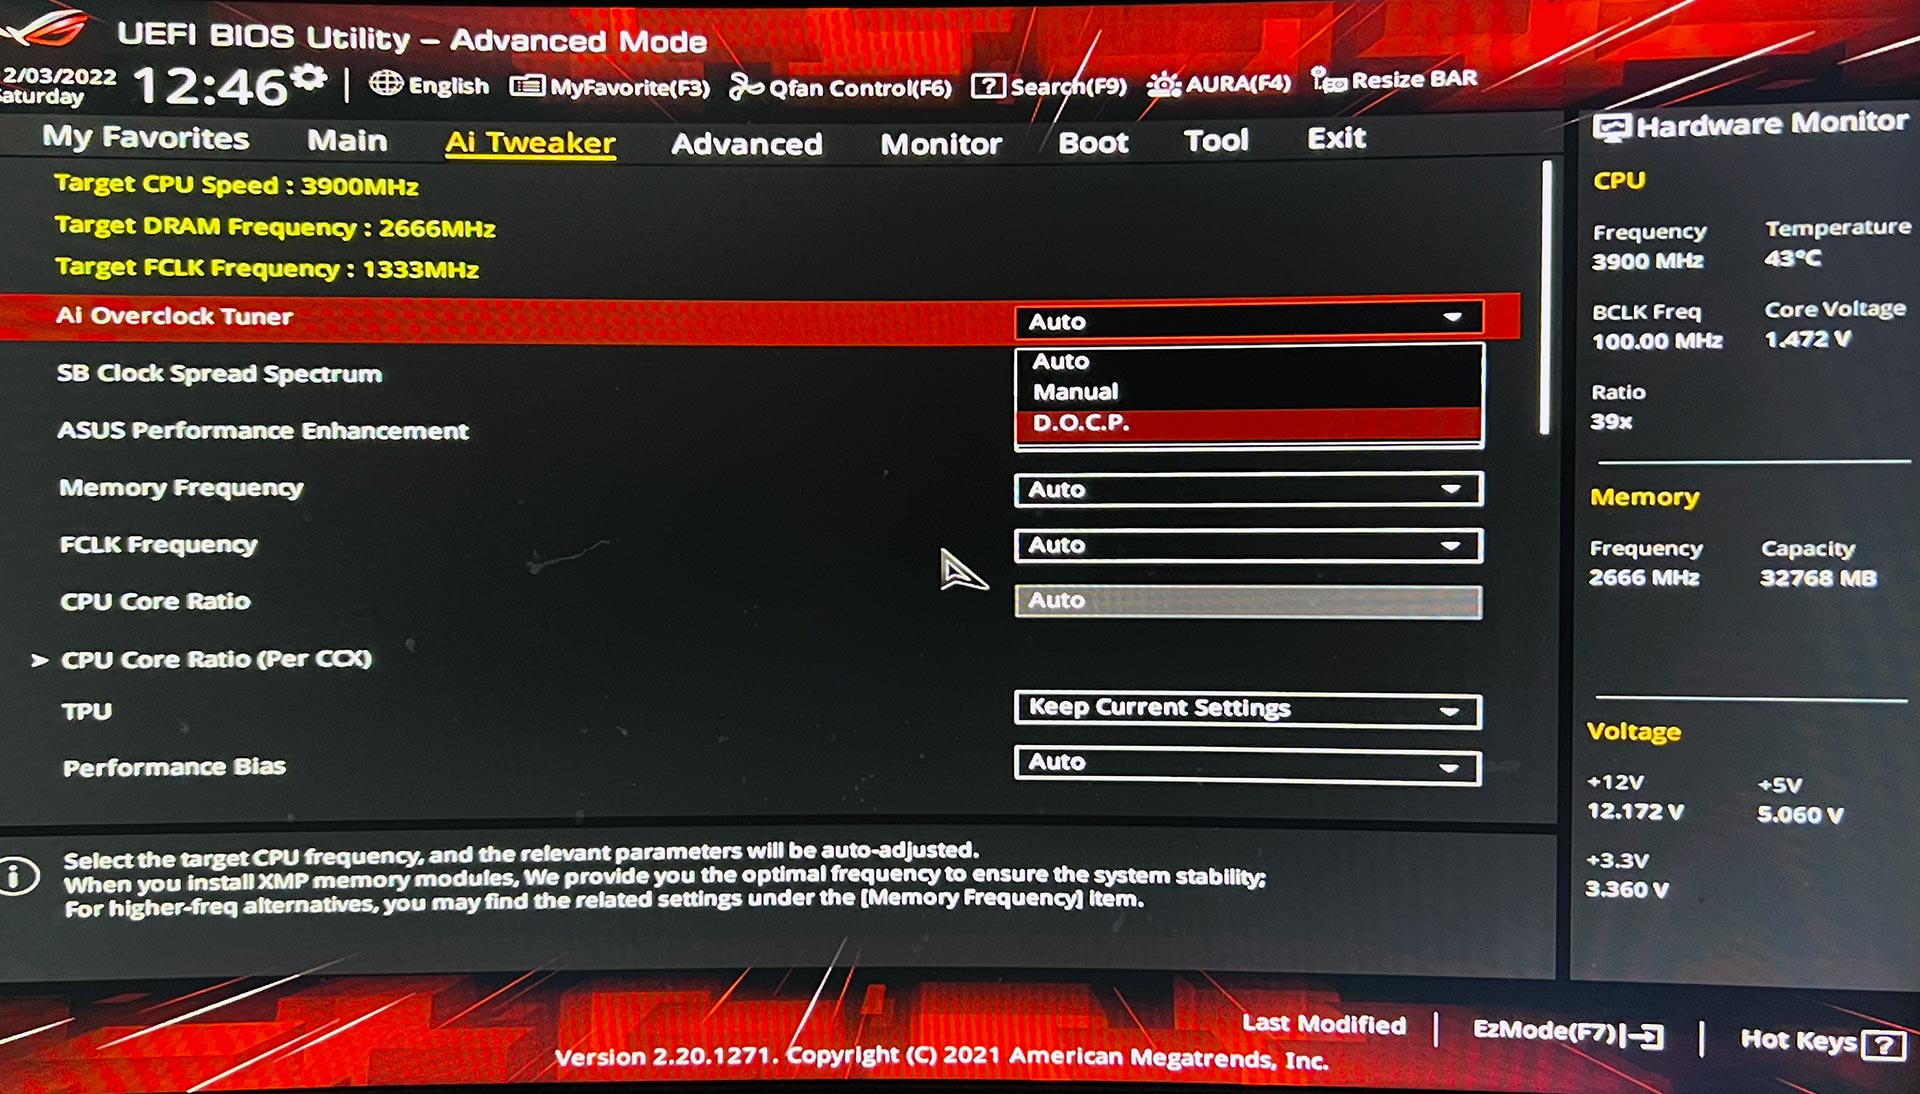 Changing memory configuration within the BIOS.